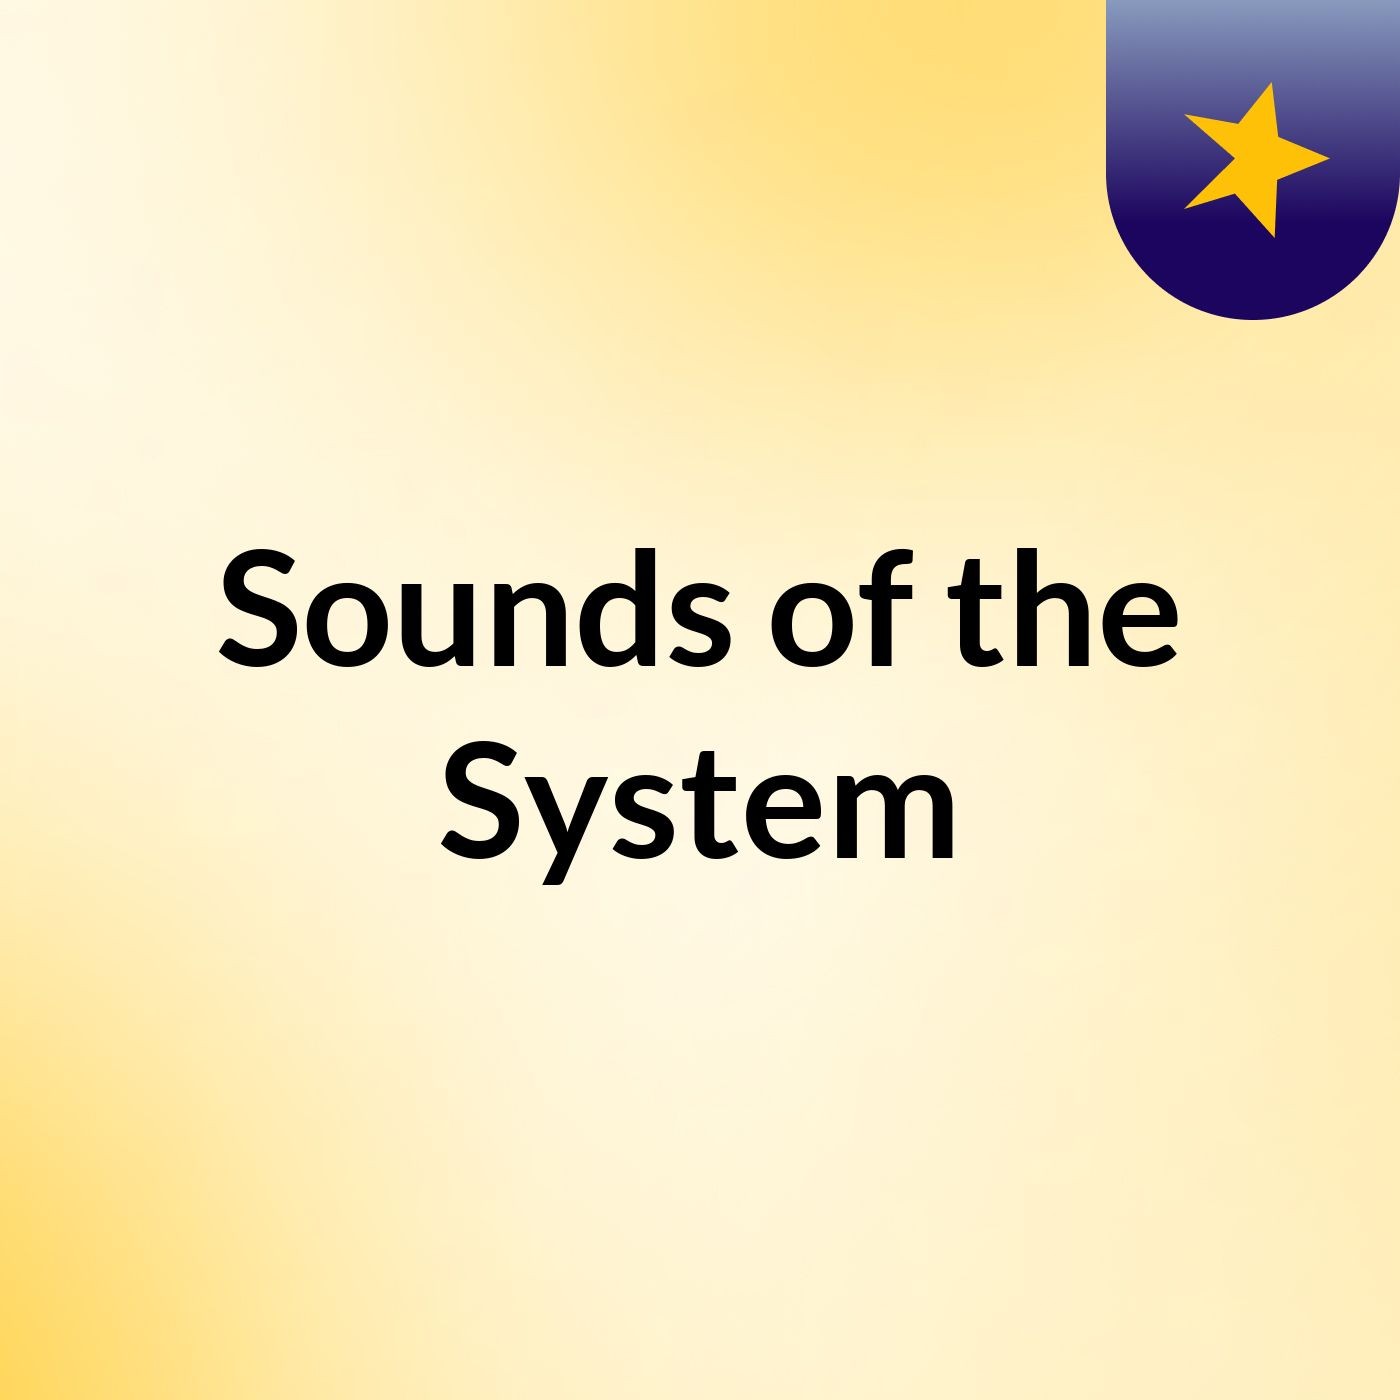 Sounds of the System